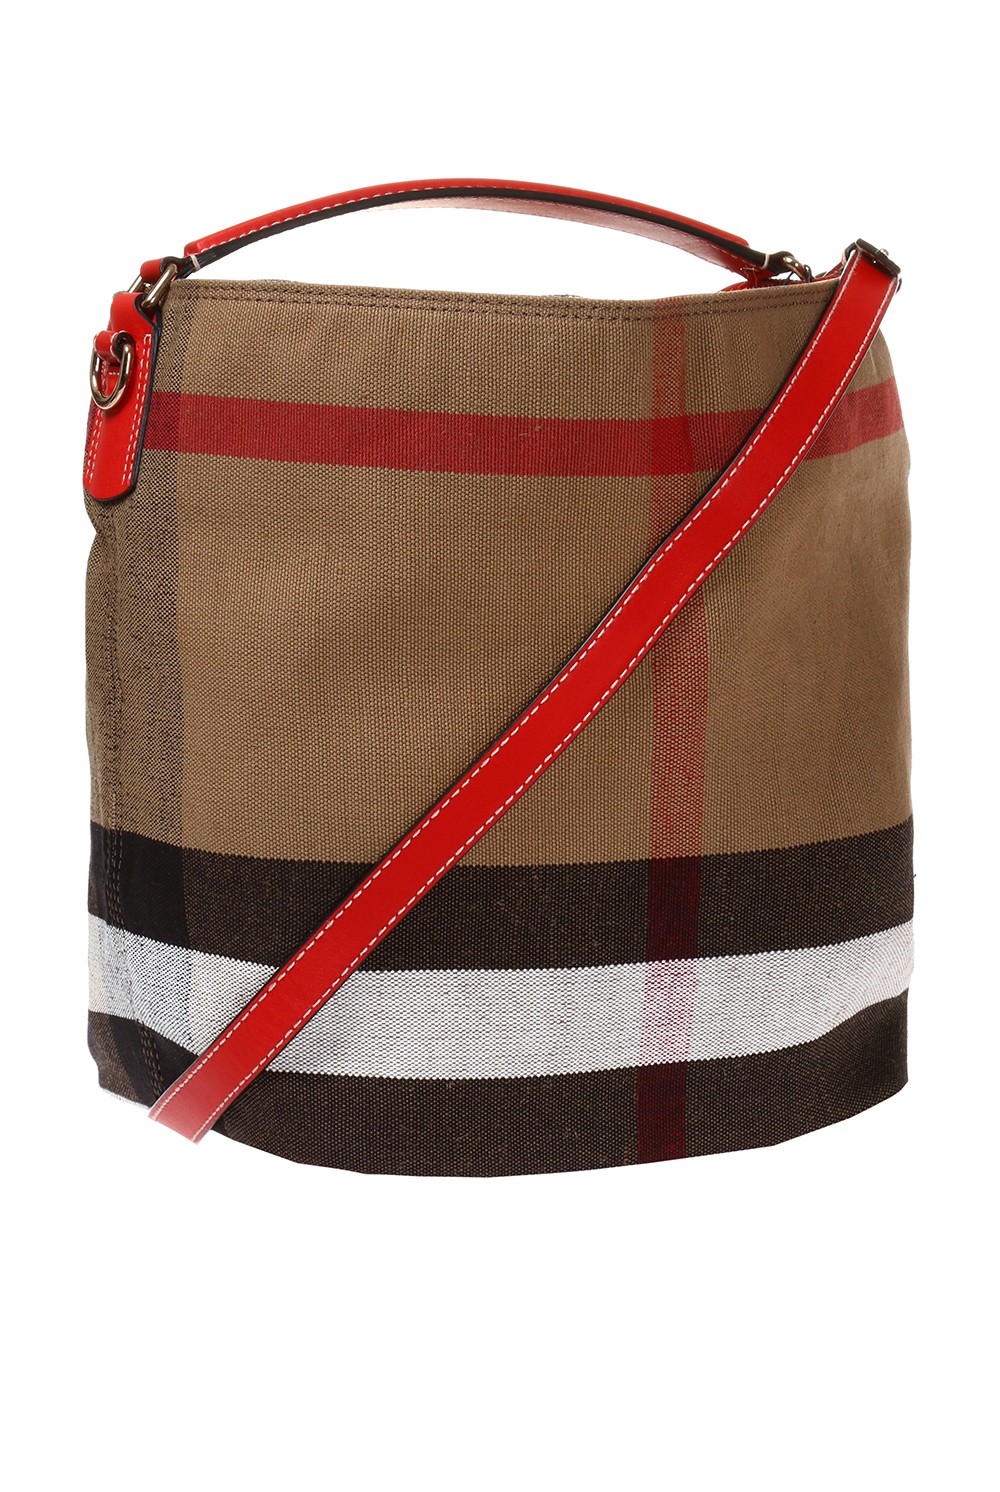 Burberry Large Ashby Cotton, Jute and Leather Shoulder Bag in Red